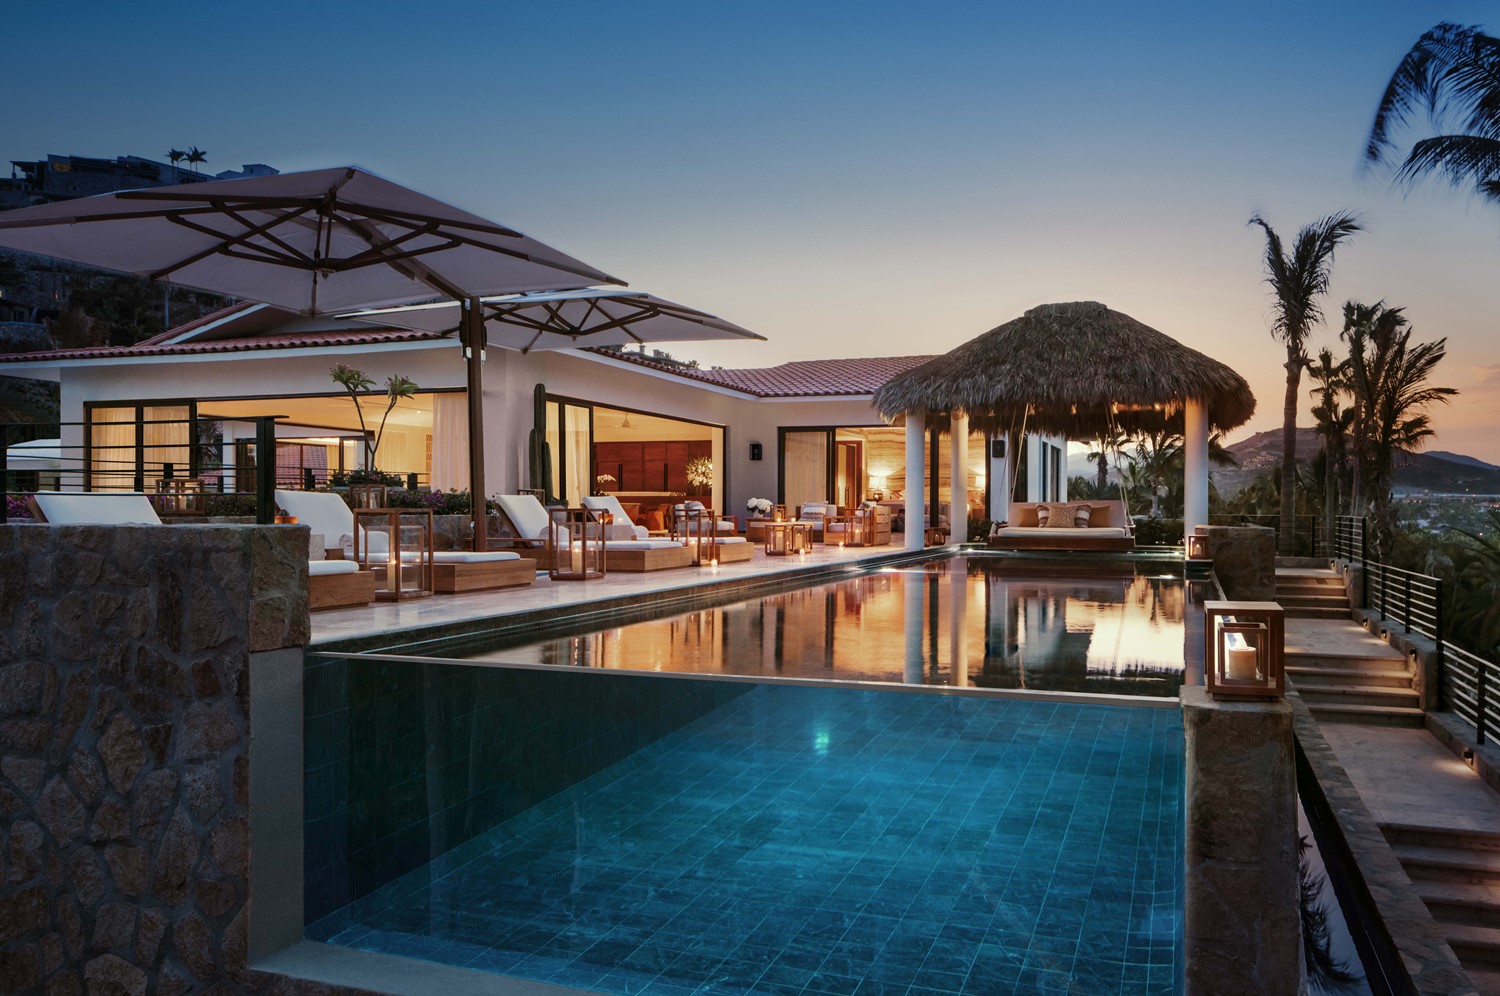 Villa One at One&Only Palmilla